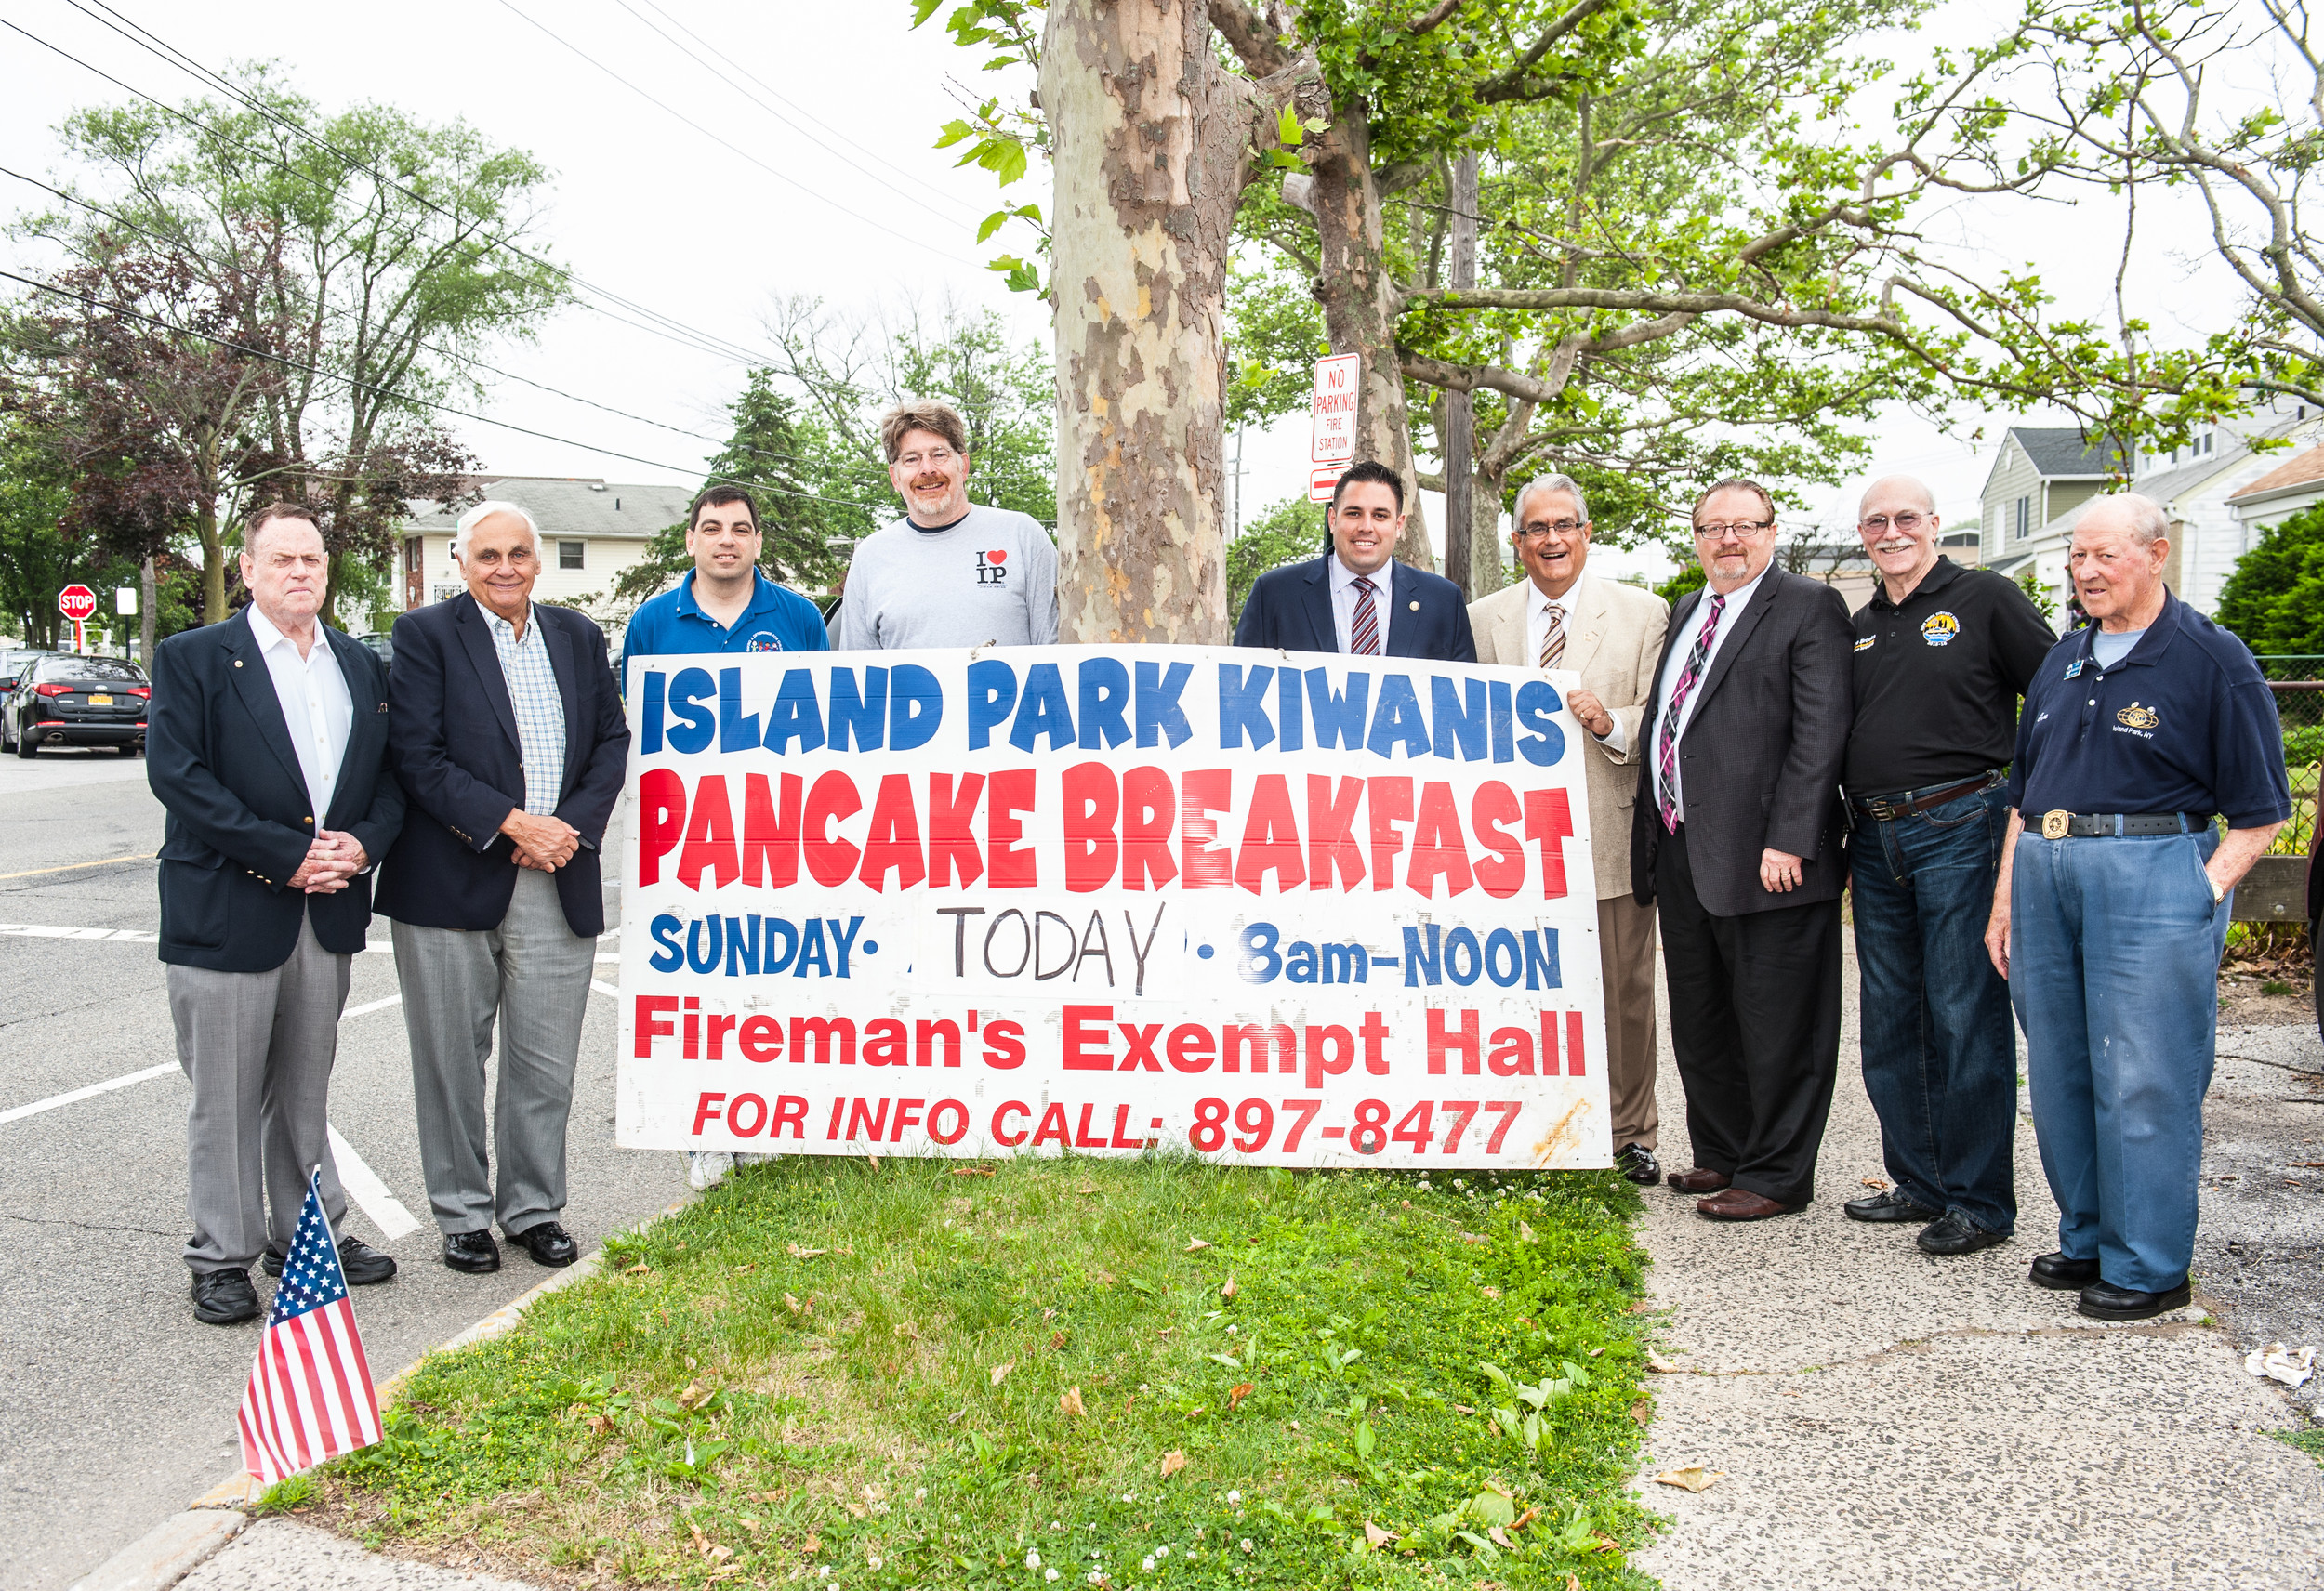 From left: Island Park Kiwanis acting President Barry Shaw, Treasurer Henry “Mickey” Hastava, Oceanside Kiwanis Club President Thomas Cesiro III, Island Park Chamber of Commerce Vice President Michael Scully, Hempstead Town Councilman Anthony D’Esposito and Town Supervisor Anthony Santino, Island Park Mayor Michael McGinty and Kiwanis Long Island South West Lt. Governor Bruce Brooks, and Co-President Gene Vandermosten.